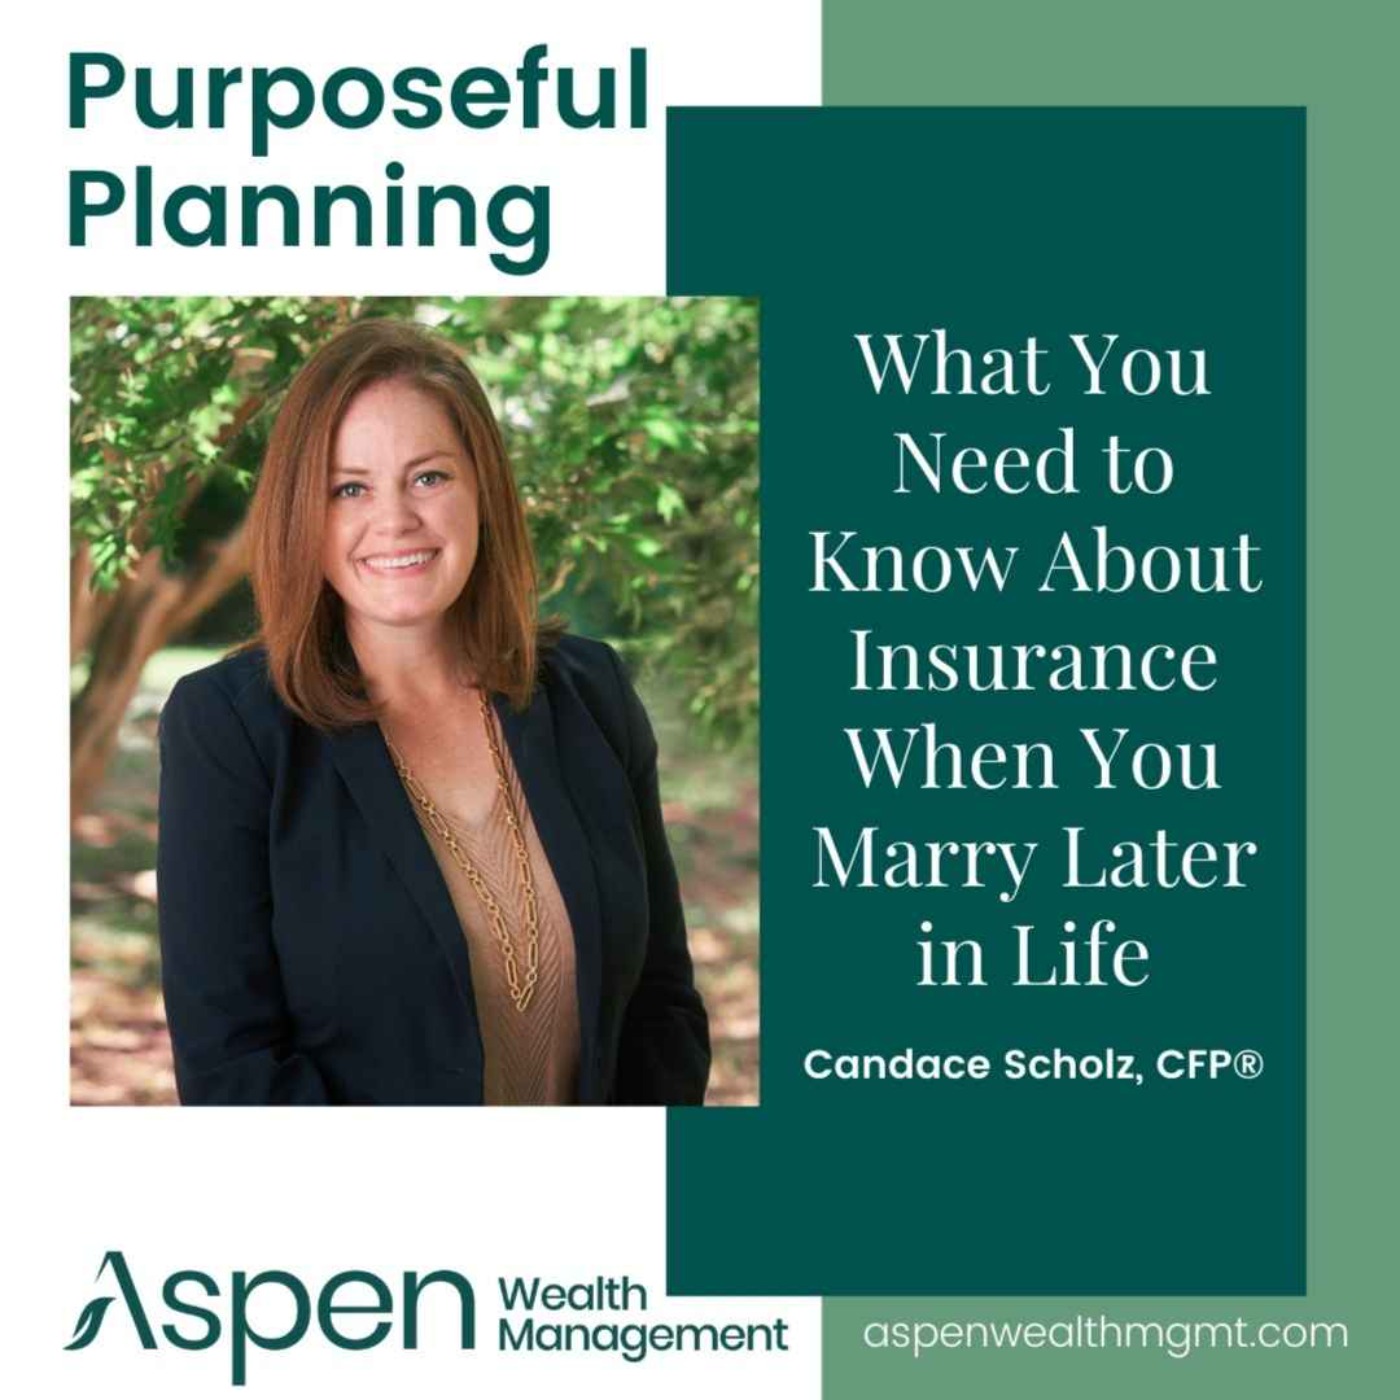 What to Know About Insurance When You Marry Later in Life, Part 2